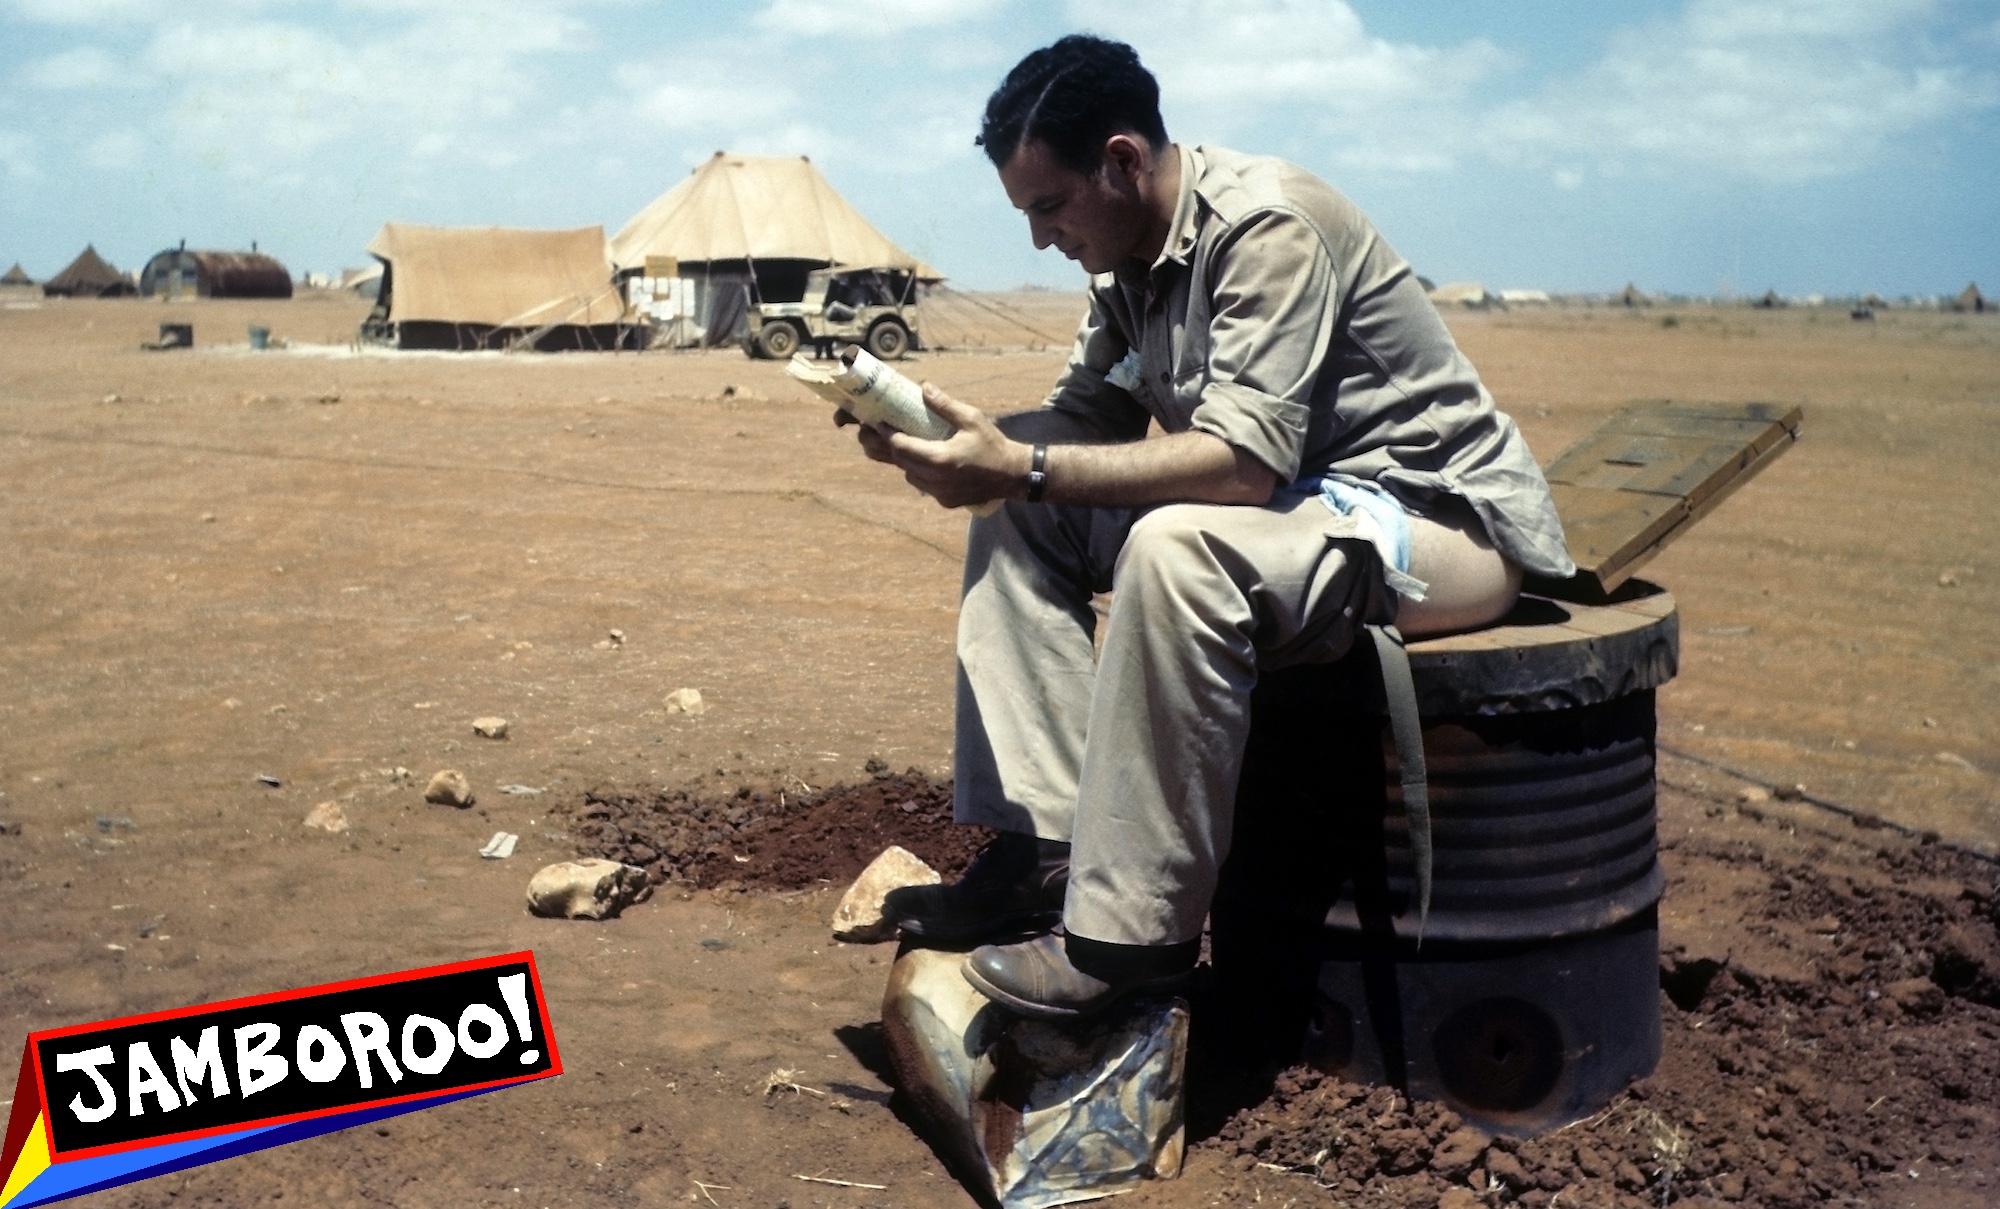 BENGHAZI, LIBYA - AUGUST 8,1943: A view as a soldier sits at the latrine at the U.S Air Force base in Benghazi, Libya. (Photo by Ivan Dmitri/Michael Ochs Archives/Getty Images)